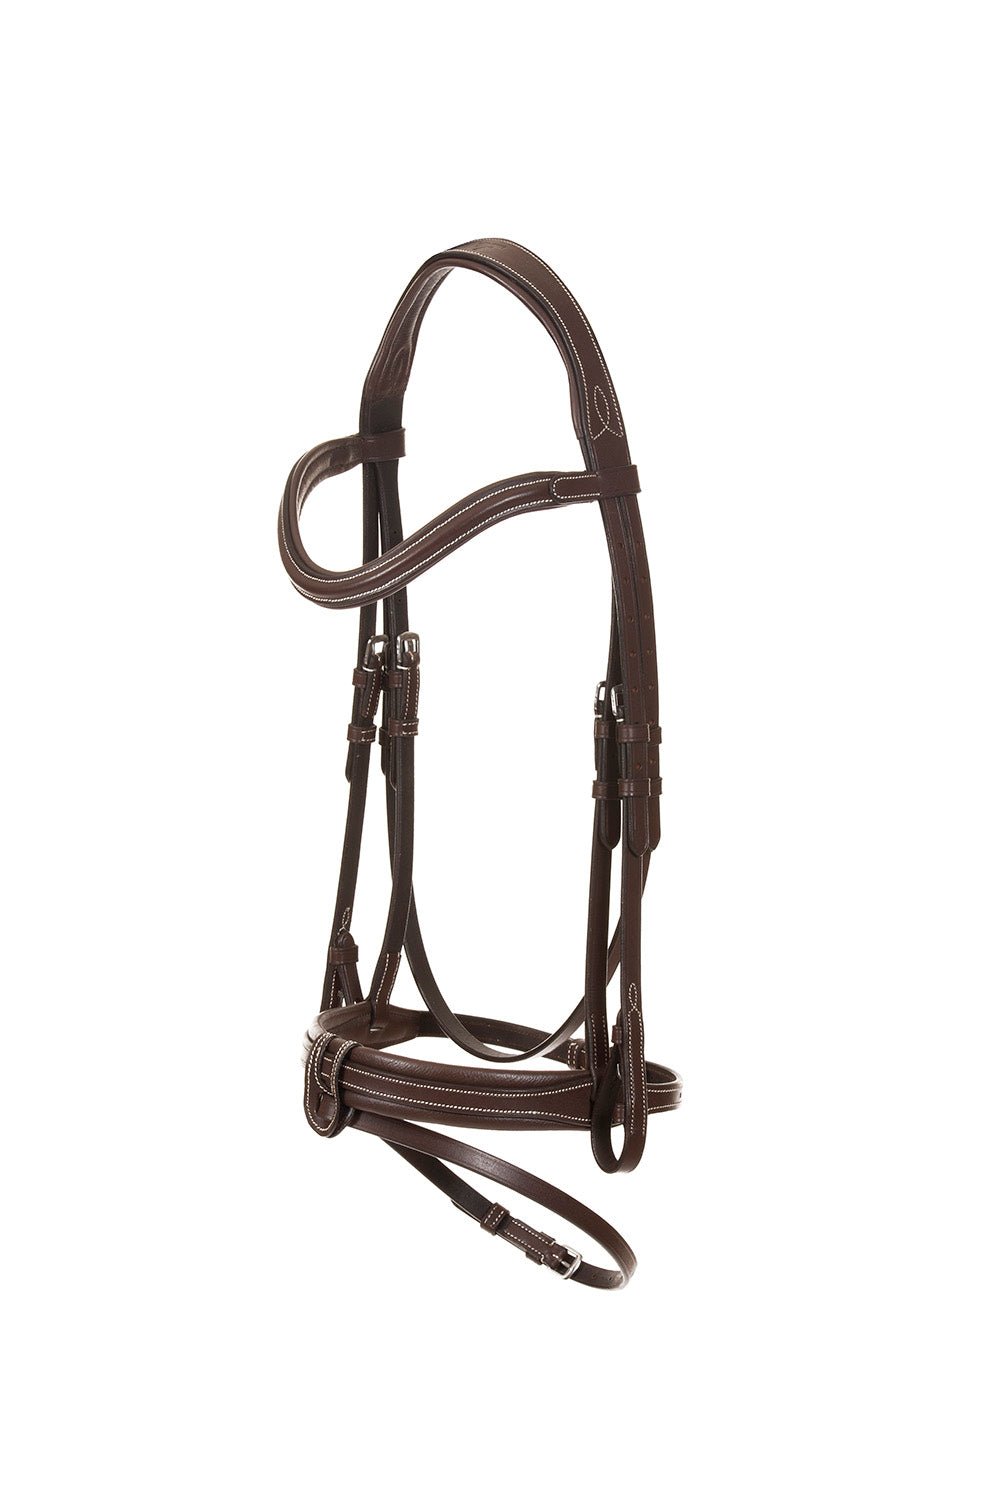 Makebe Italy Sleek Anatomical Bridle w/ Convex Noseband - Equiluxe Tack